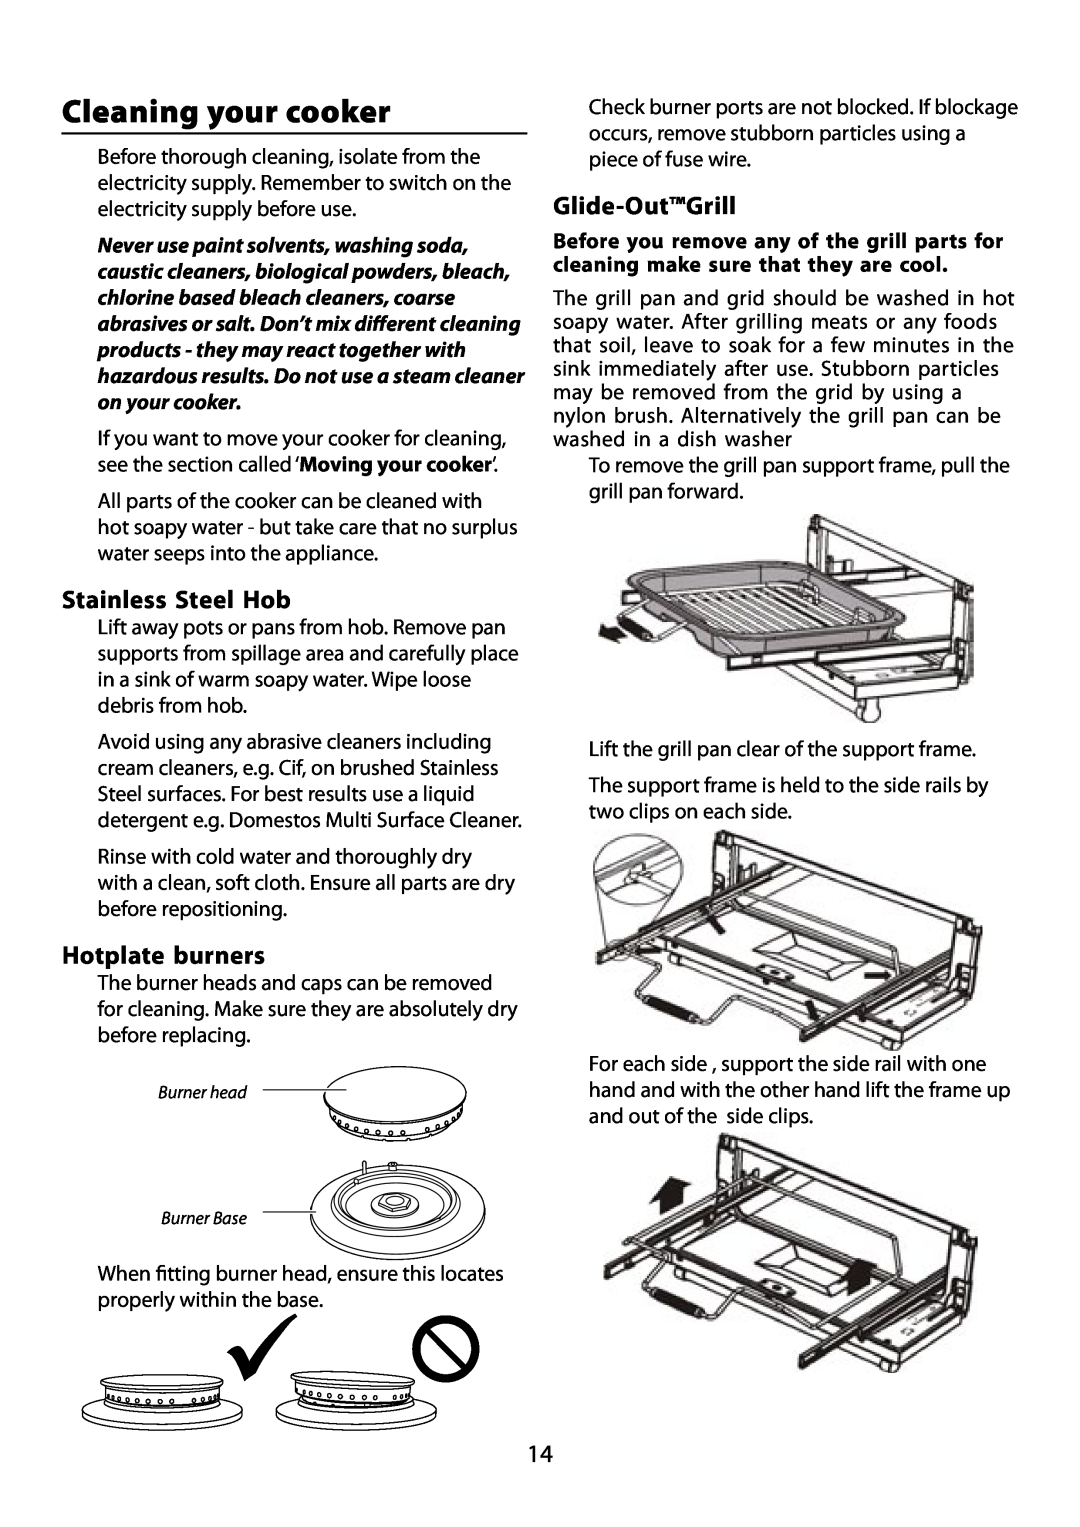 Garmin 210 GEO T DL user manual Cleaning your cooker, Stainless Steel Hob, Hotplate burners, Glide-OutGrill 